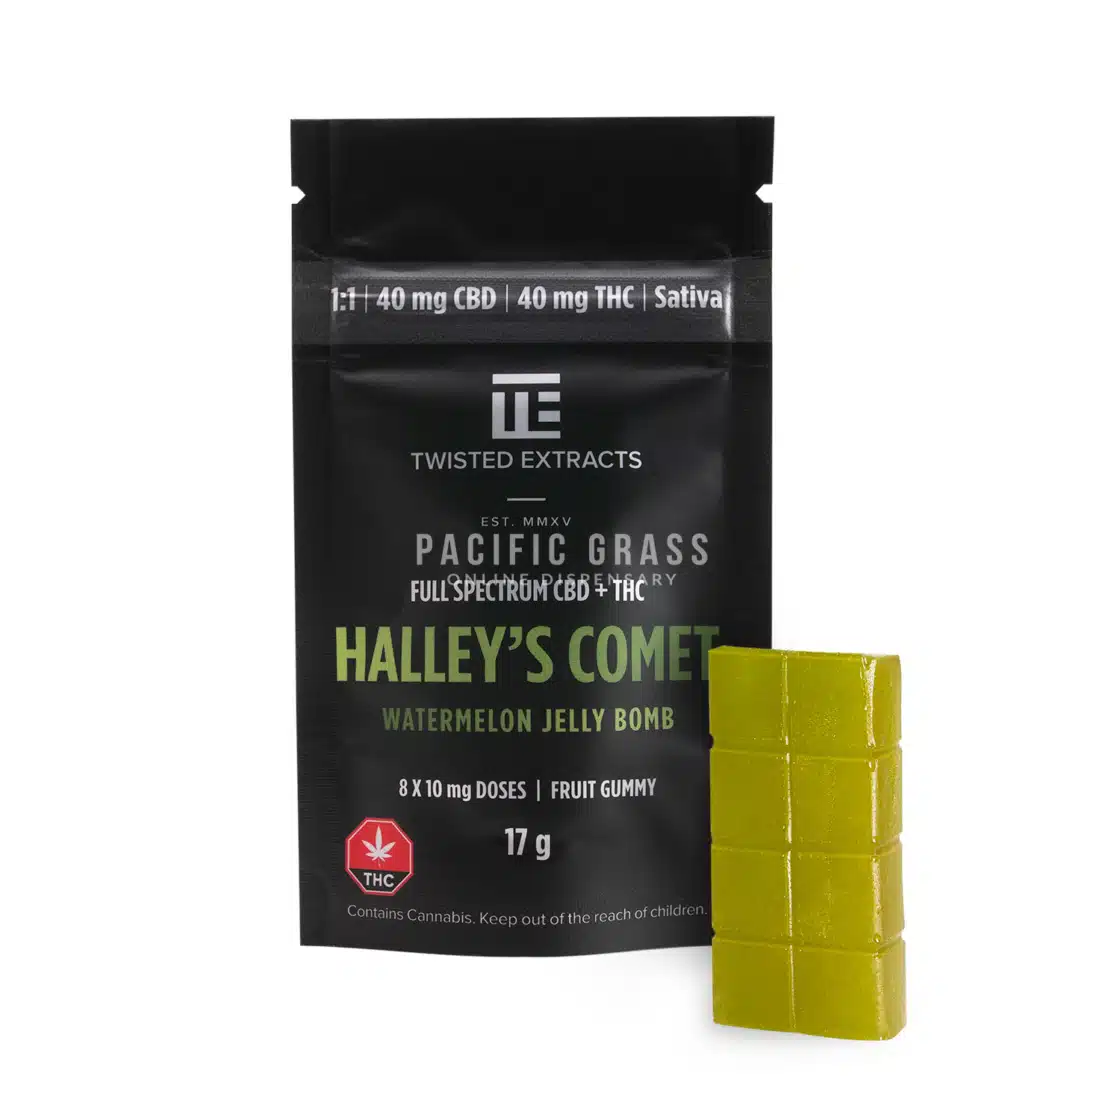 Twisted Extracts Halley's Comet 1:1 Jelly Bomb Watermelon